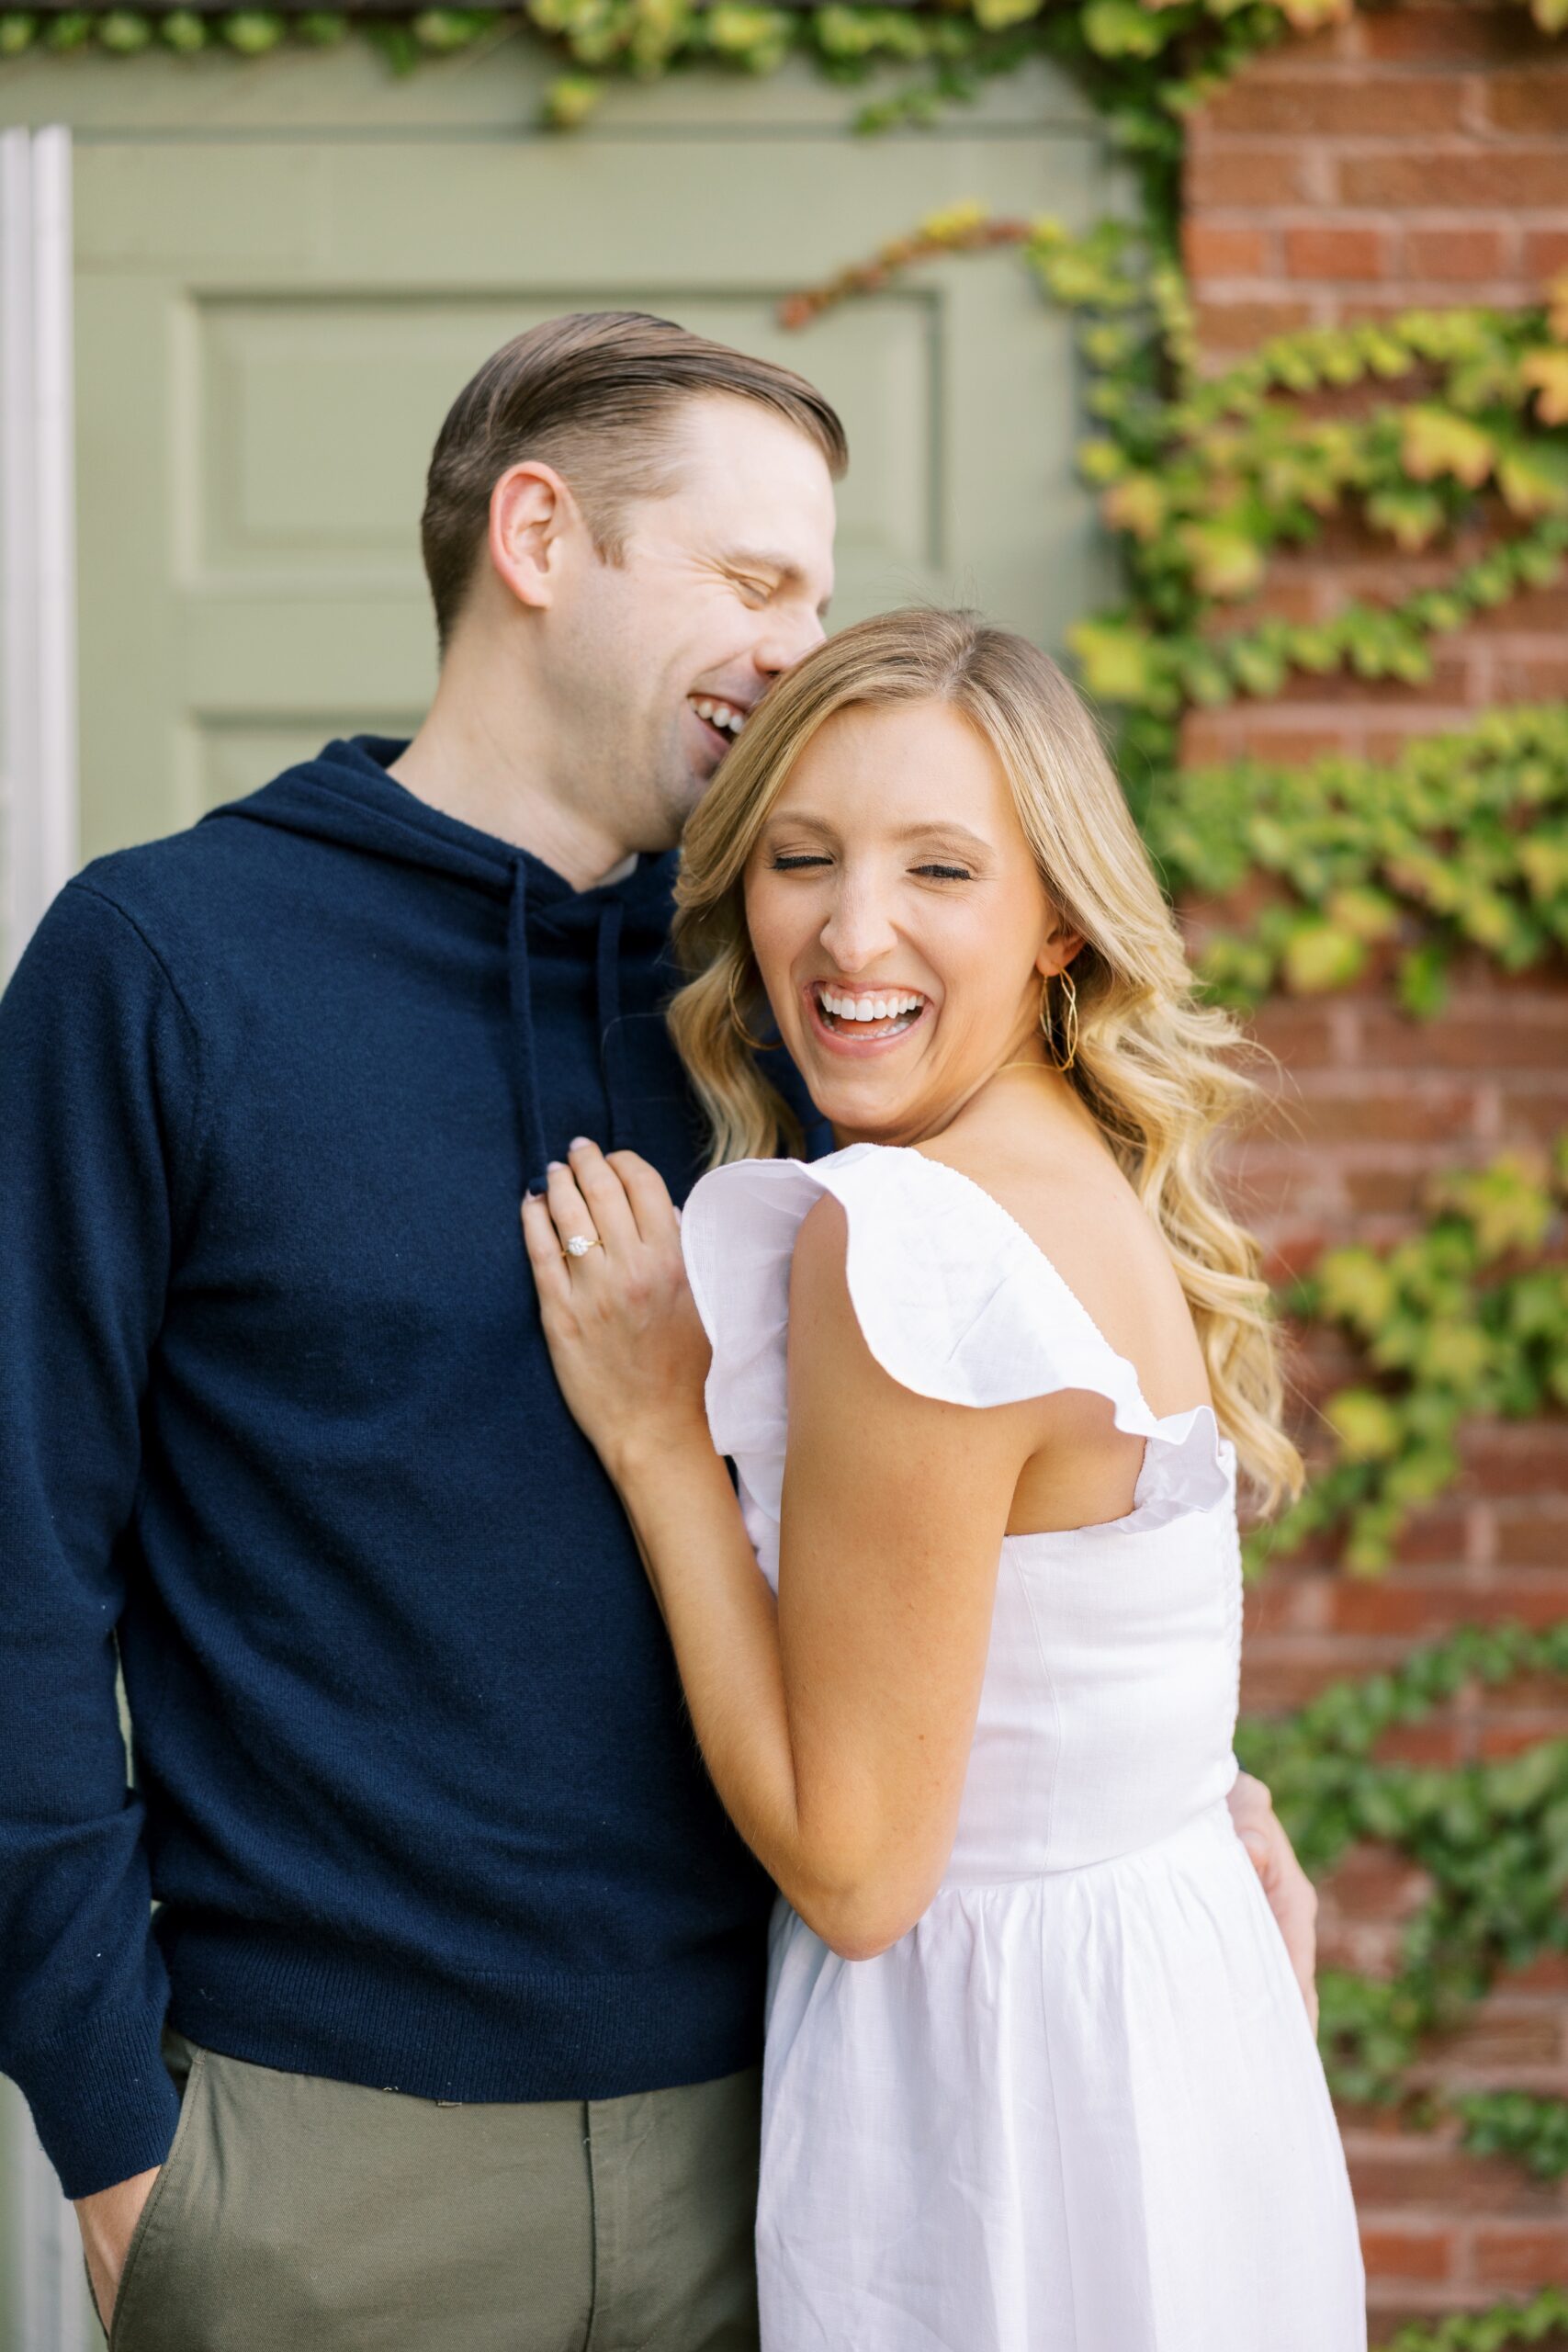 Man and woman laugh during engagement photos session